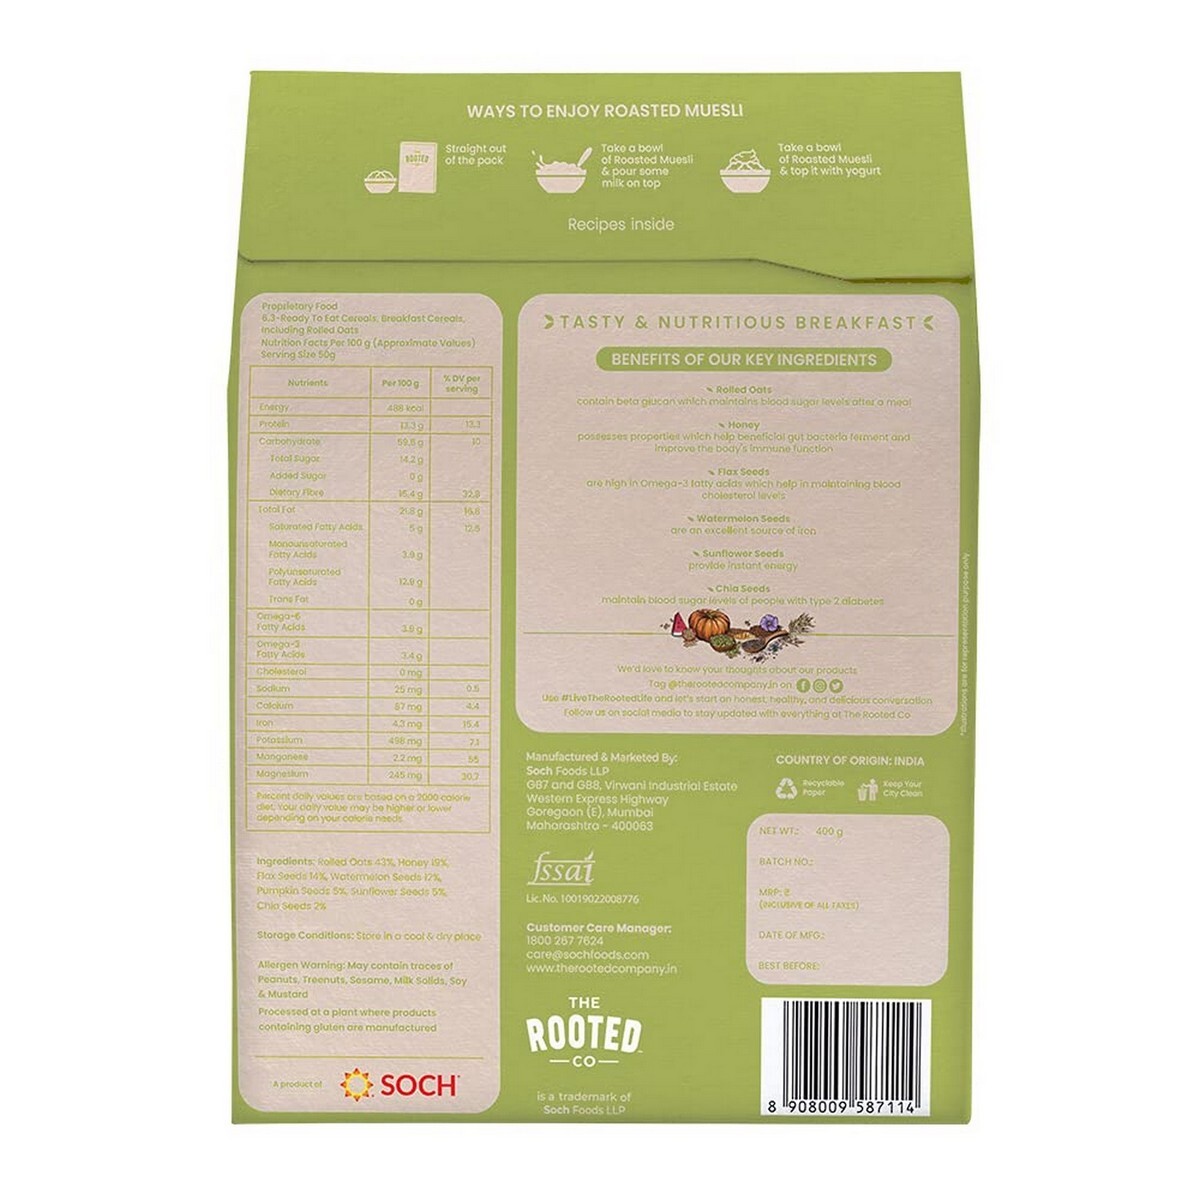 The Rooted Company Roasted Muesli Super Seed 400g